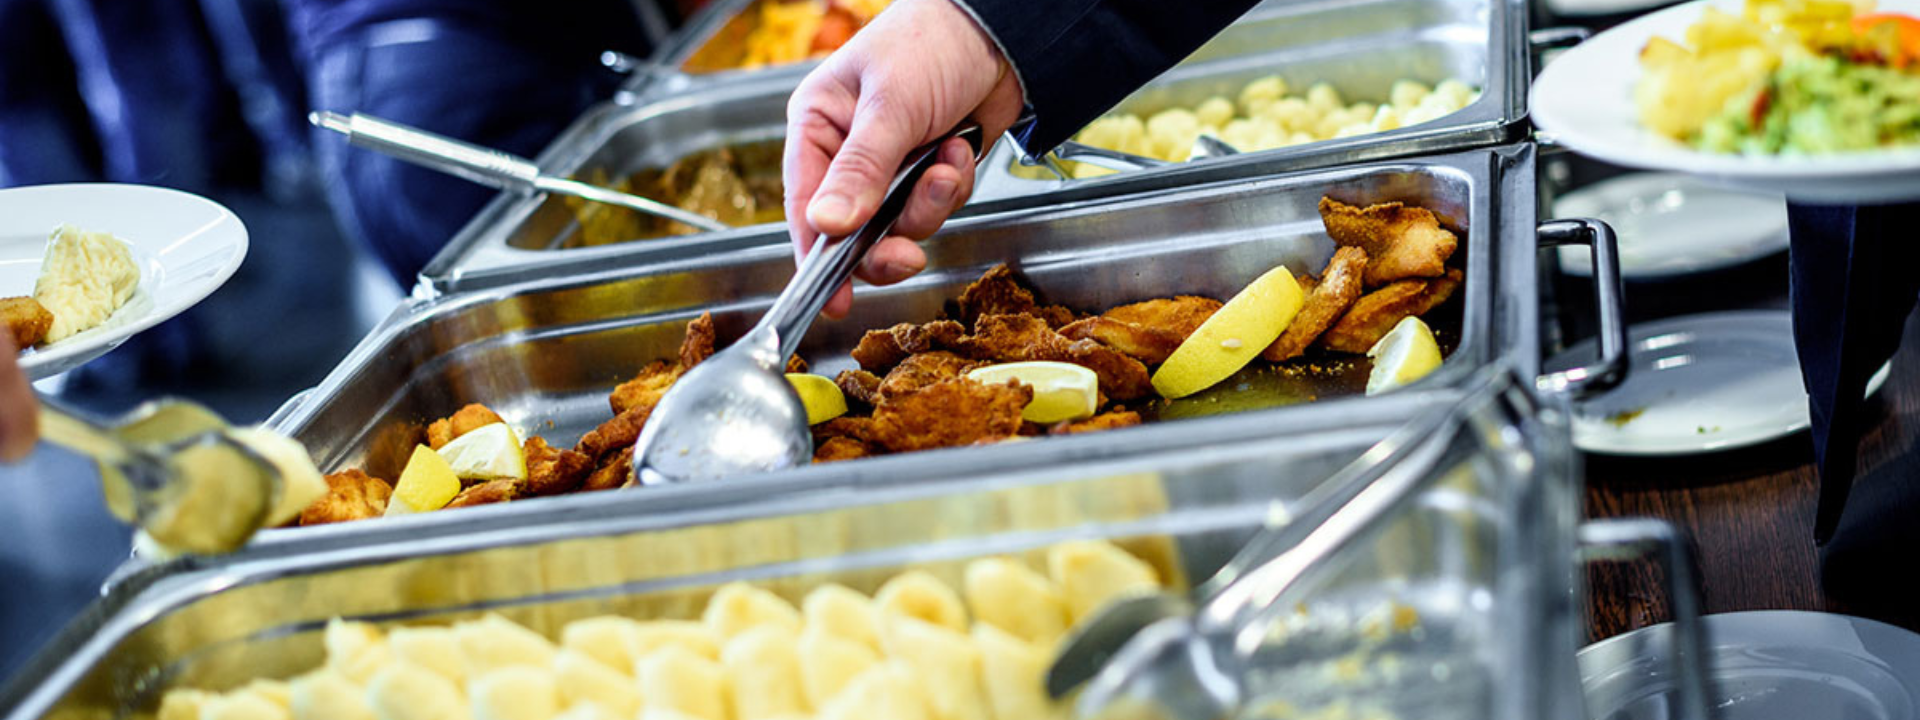 Al-Nab‘a-Top industrial catering services and supplies in oman